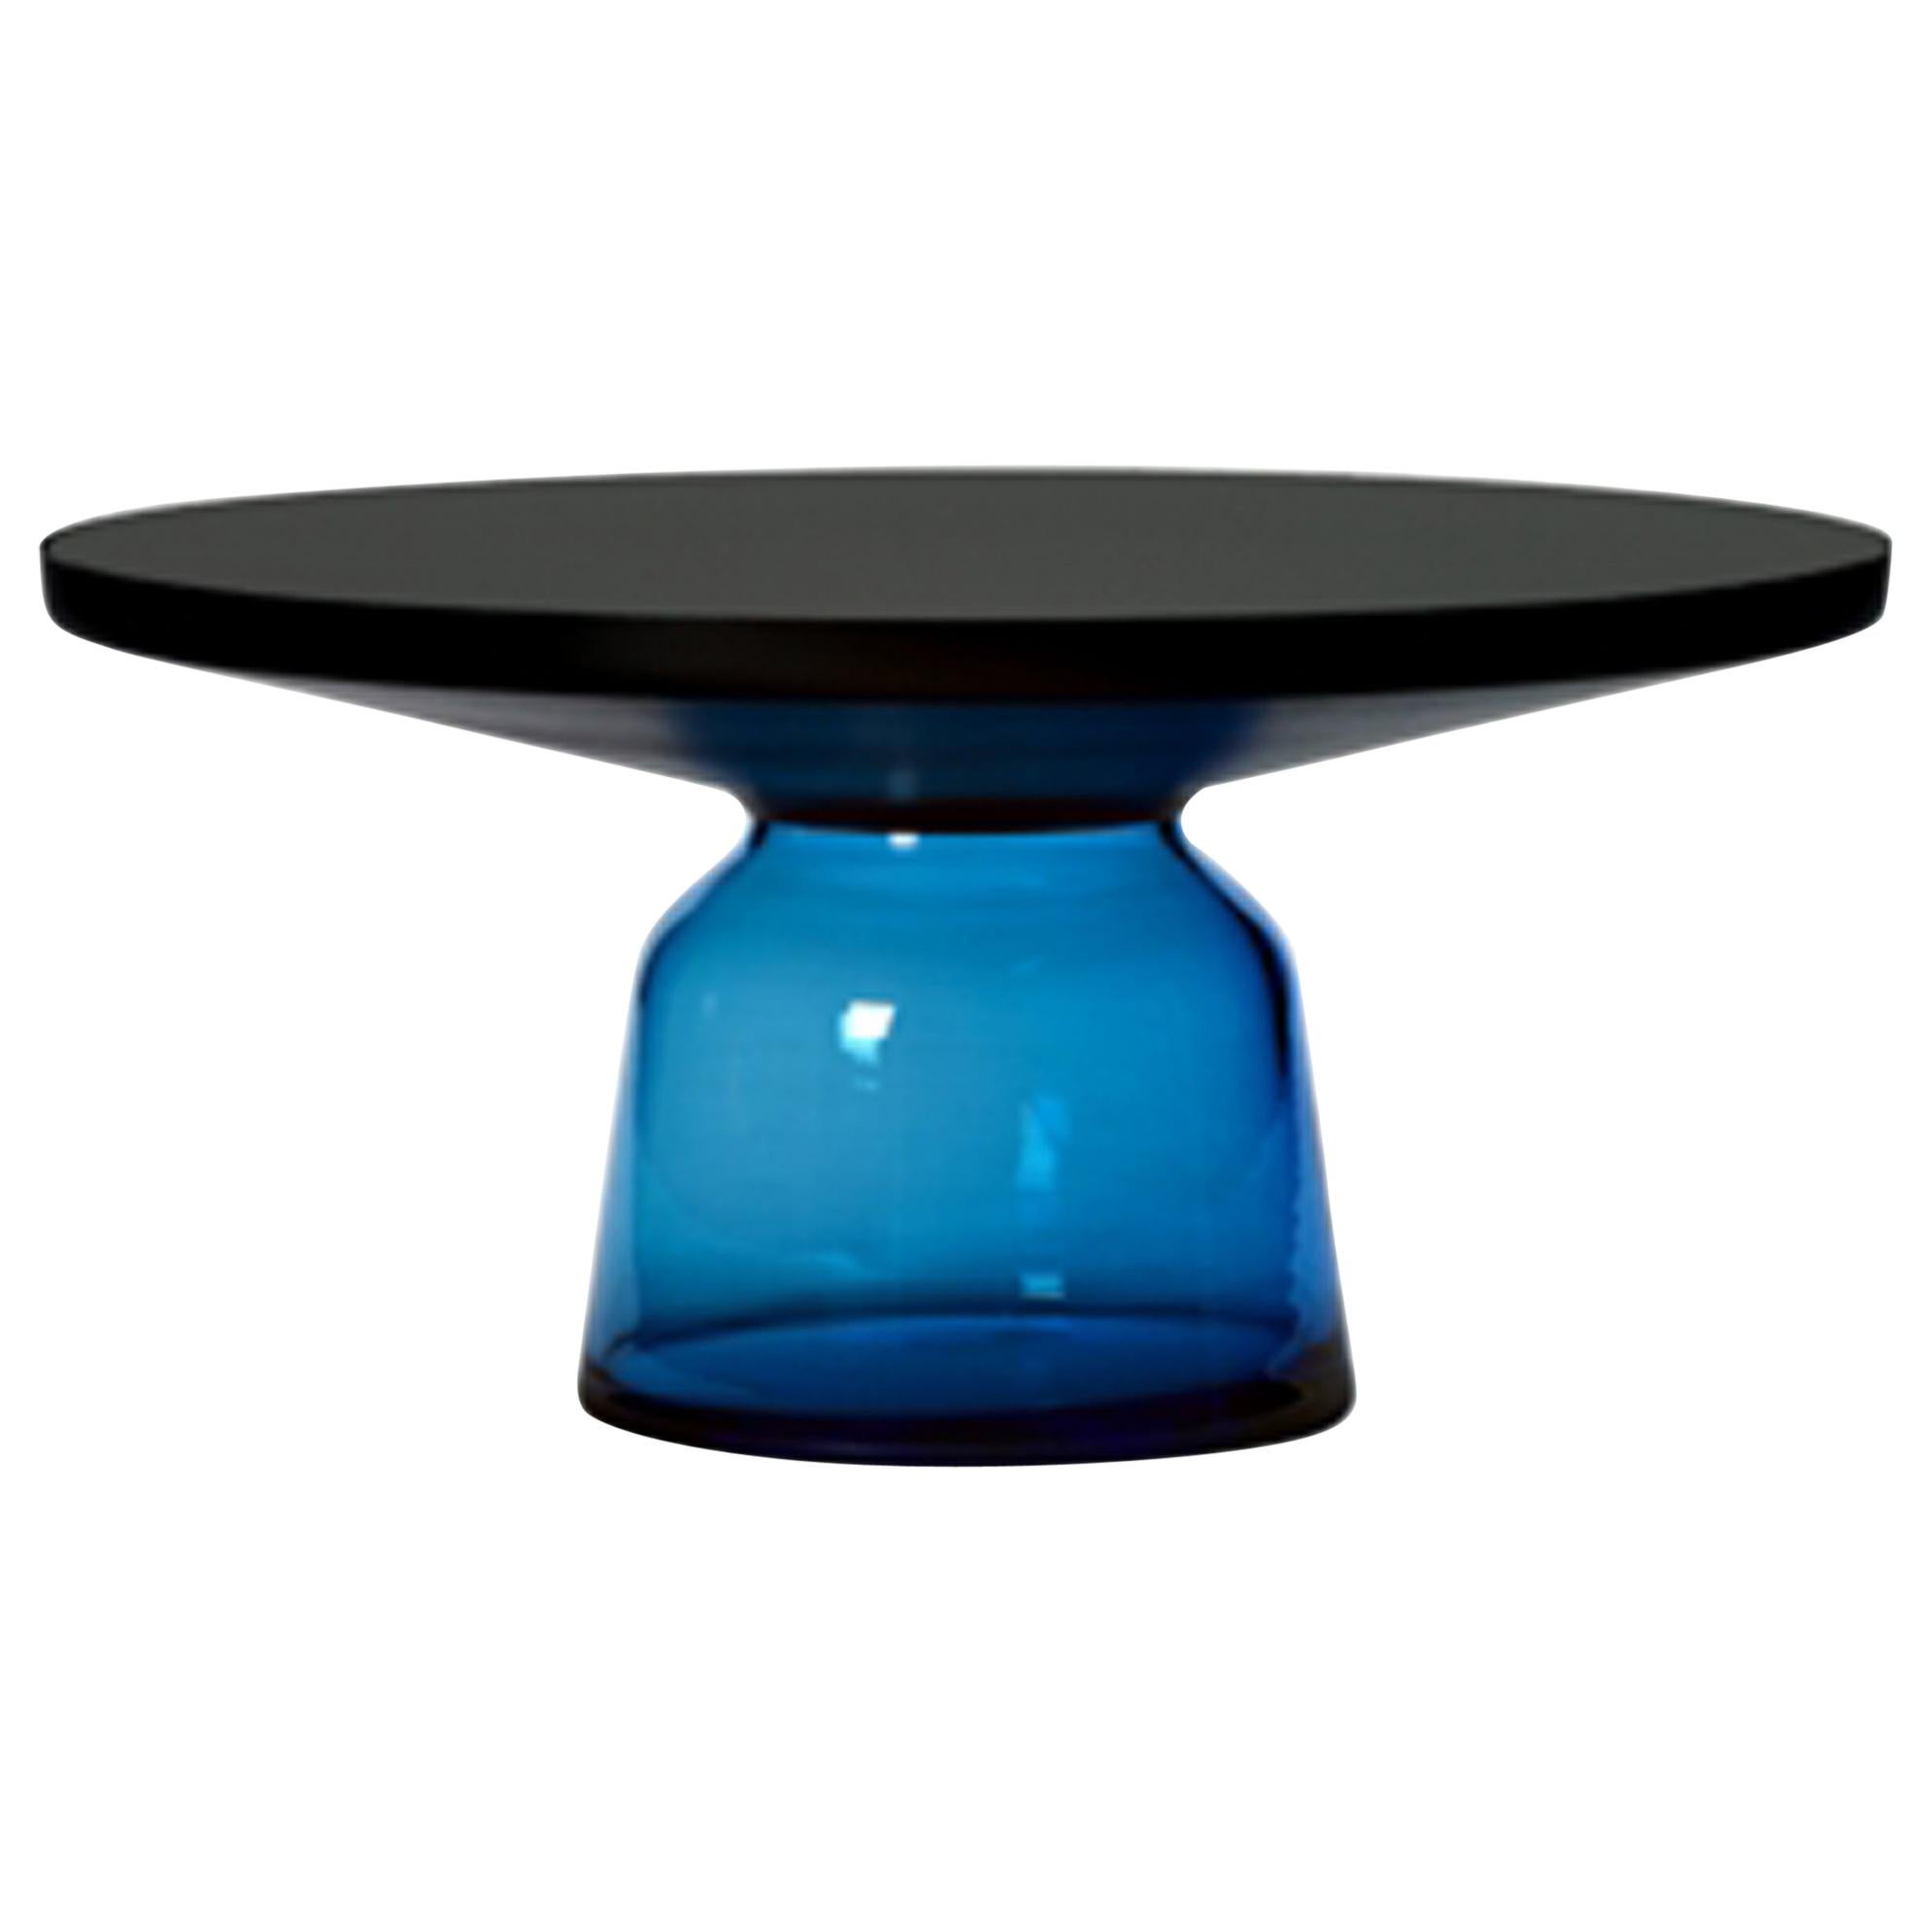 ClassiCon Bell Coffee Table in Black and Sapphire Blue by Sebastian Herkner